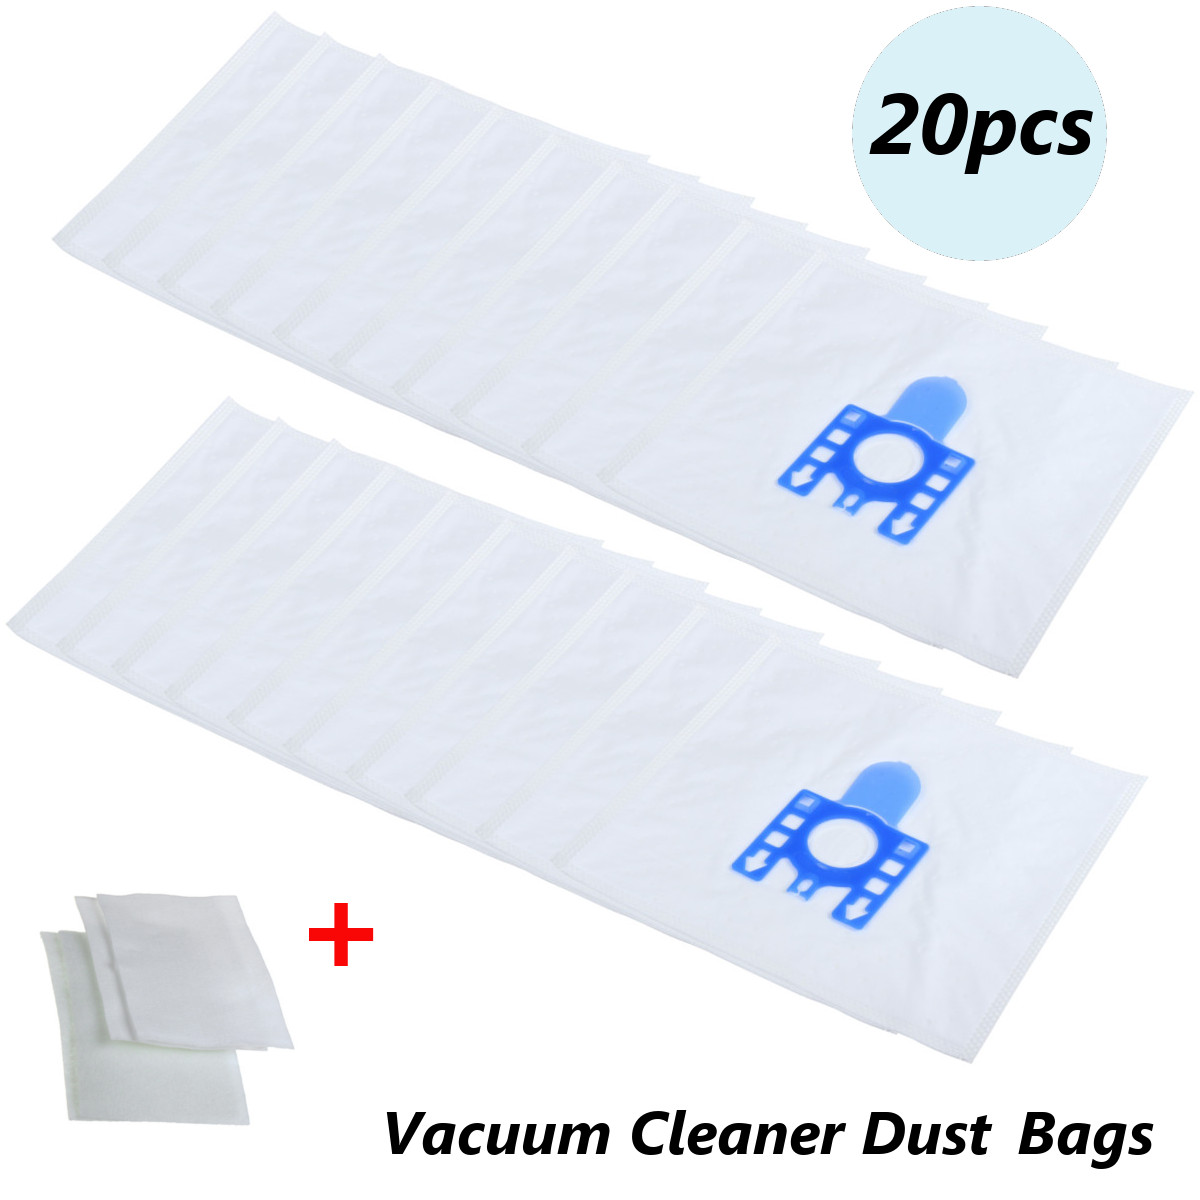 20x-Micro-Filtration-Vacuum-Cleaner-Hoover-Dust-Bags--4-Filters-For-MIELE-FJM-1279317